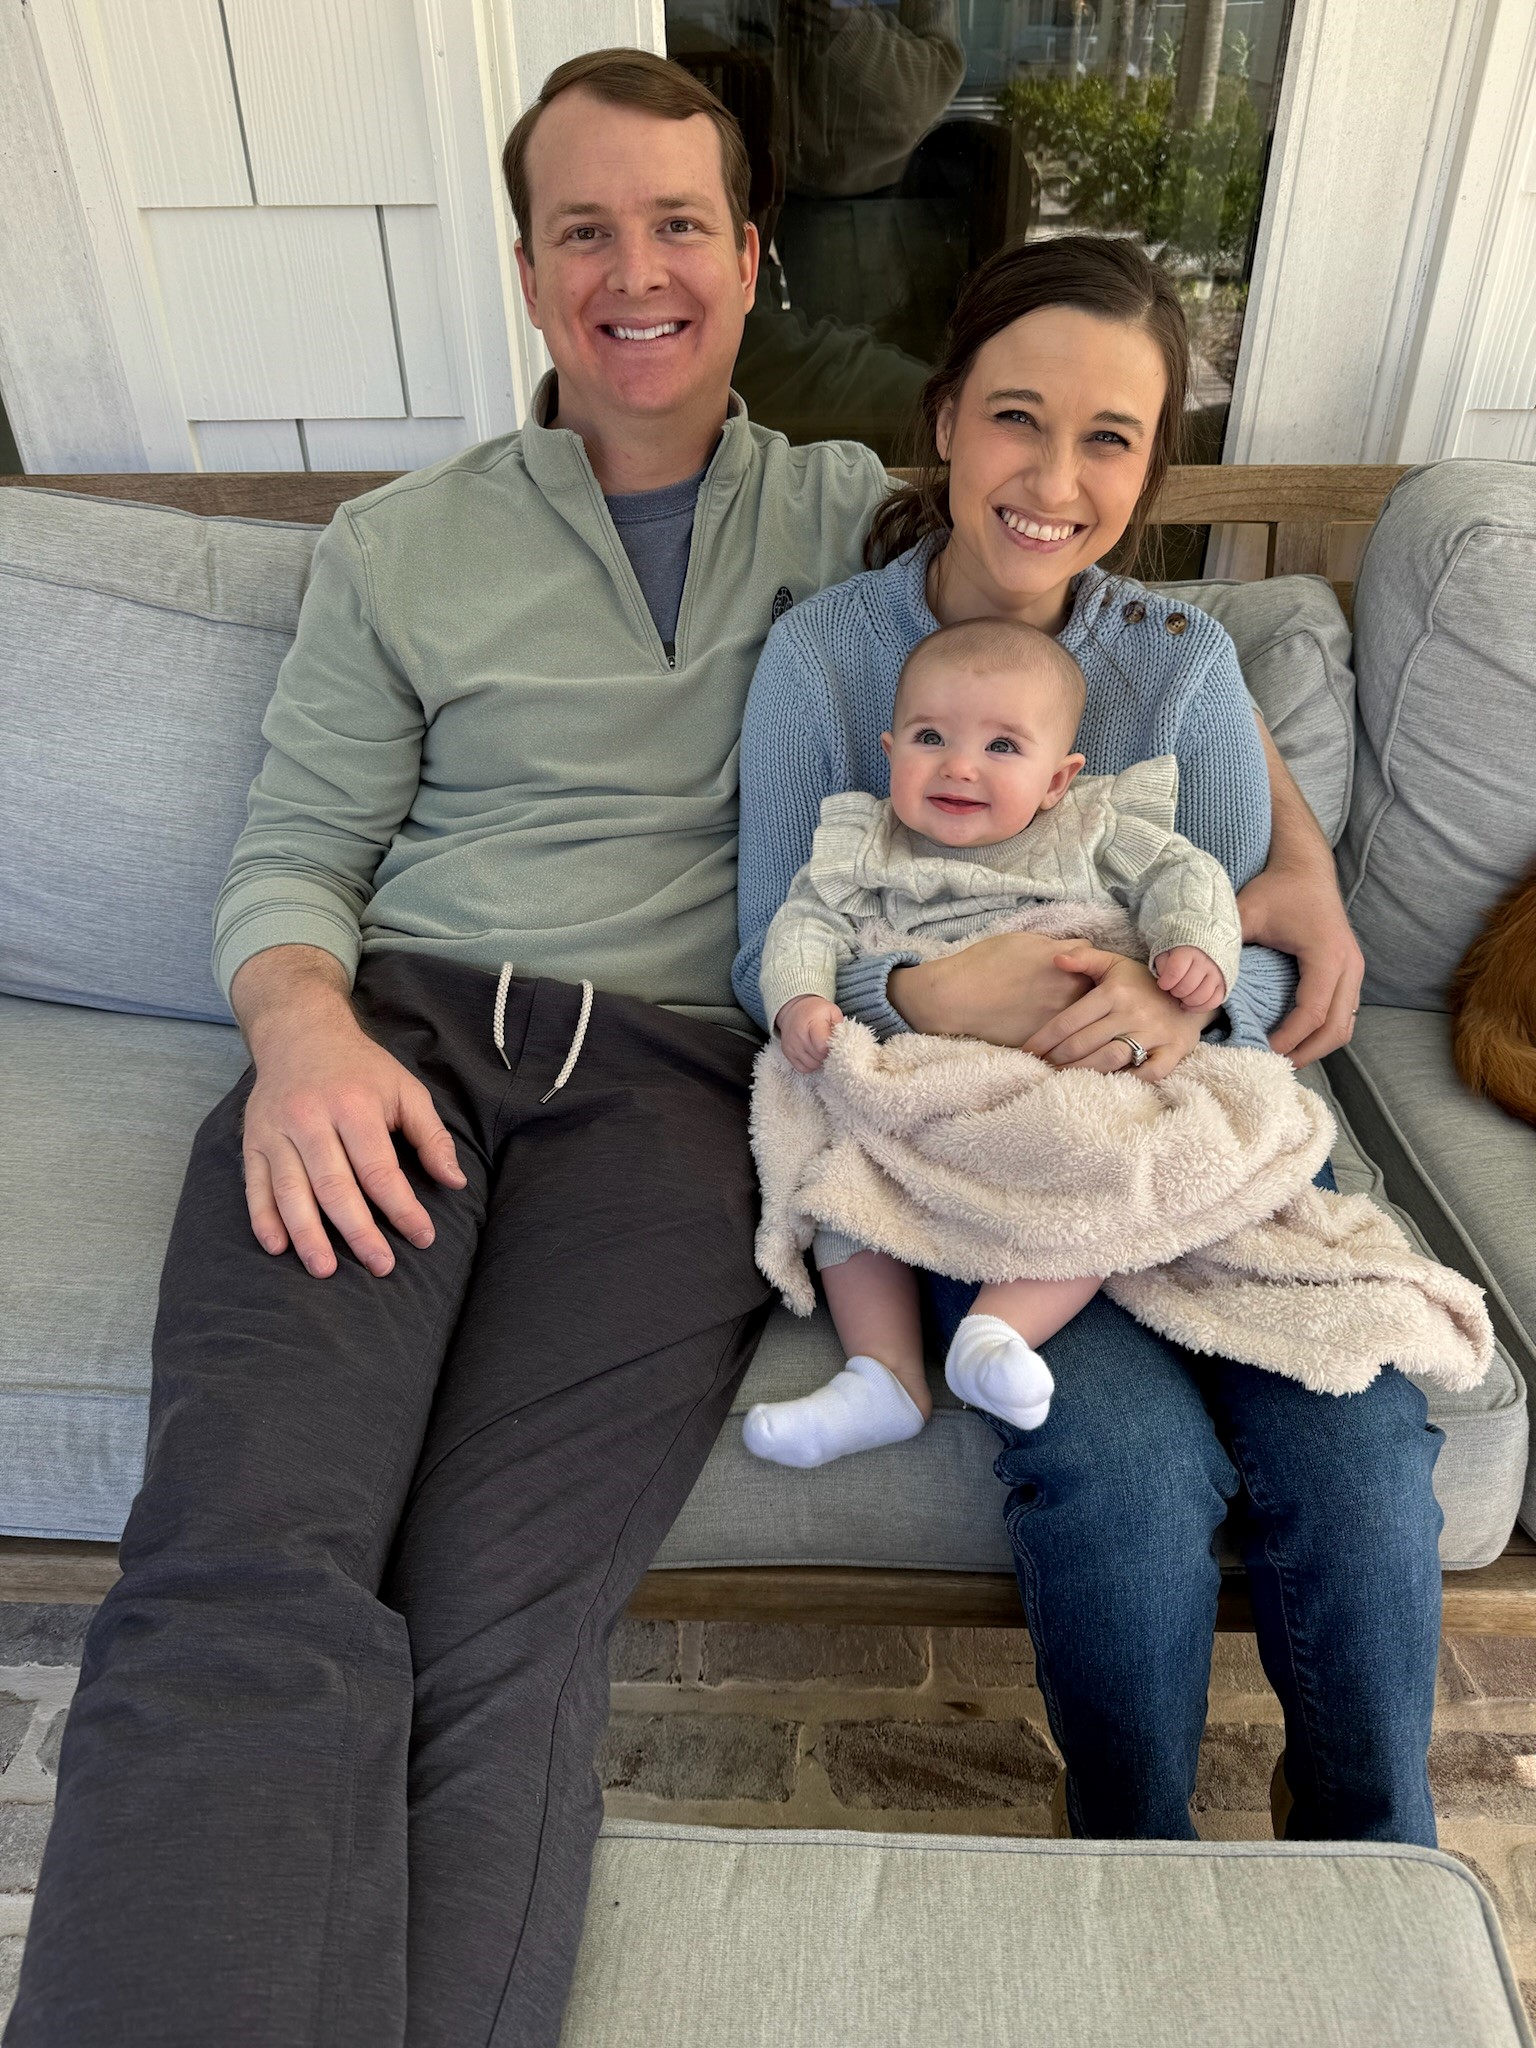 Ross Doelling, Scheller Full-time MBA ’24, sits on a couch with his arm around his wife and baby.